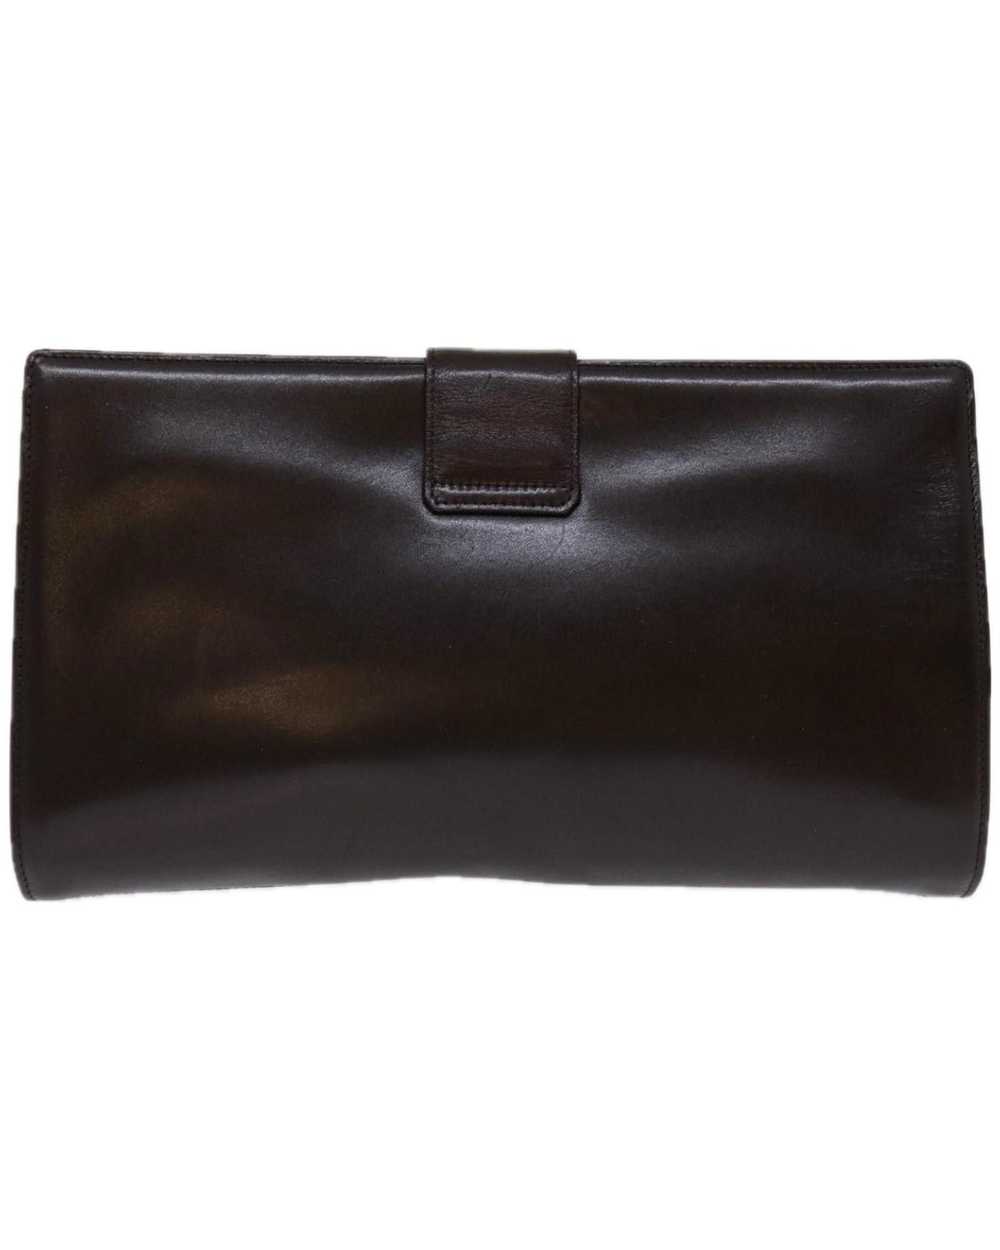 Givenchy Brown Leather Clutch Bag with Elegant De… - image 3